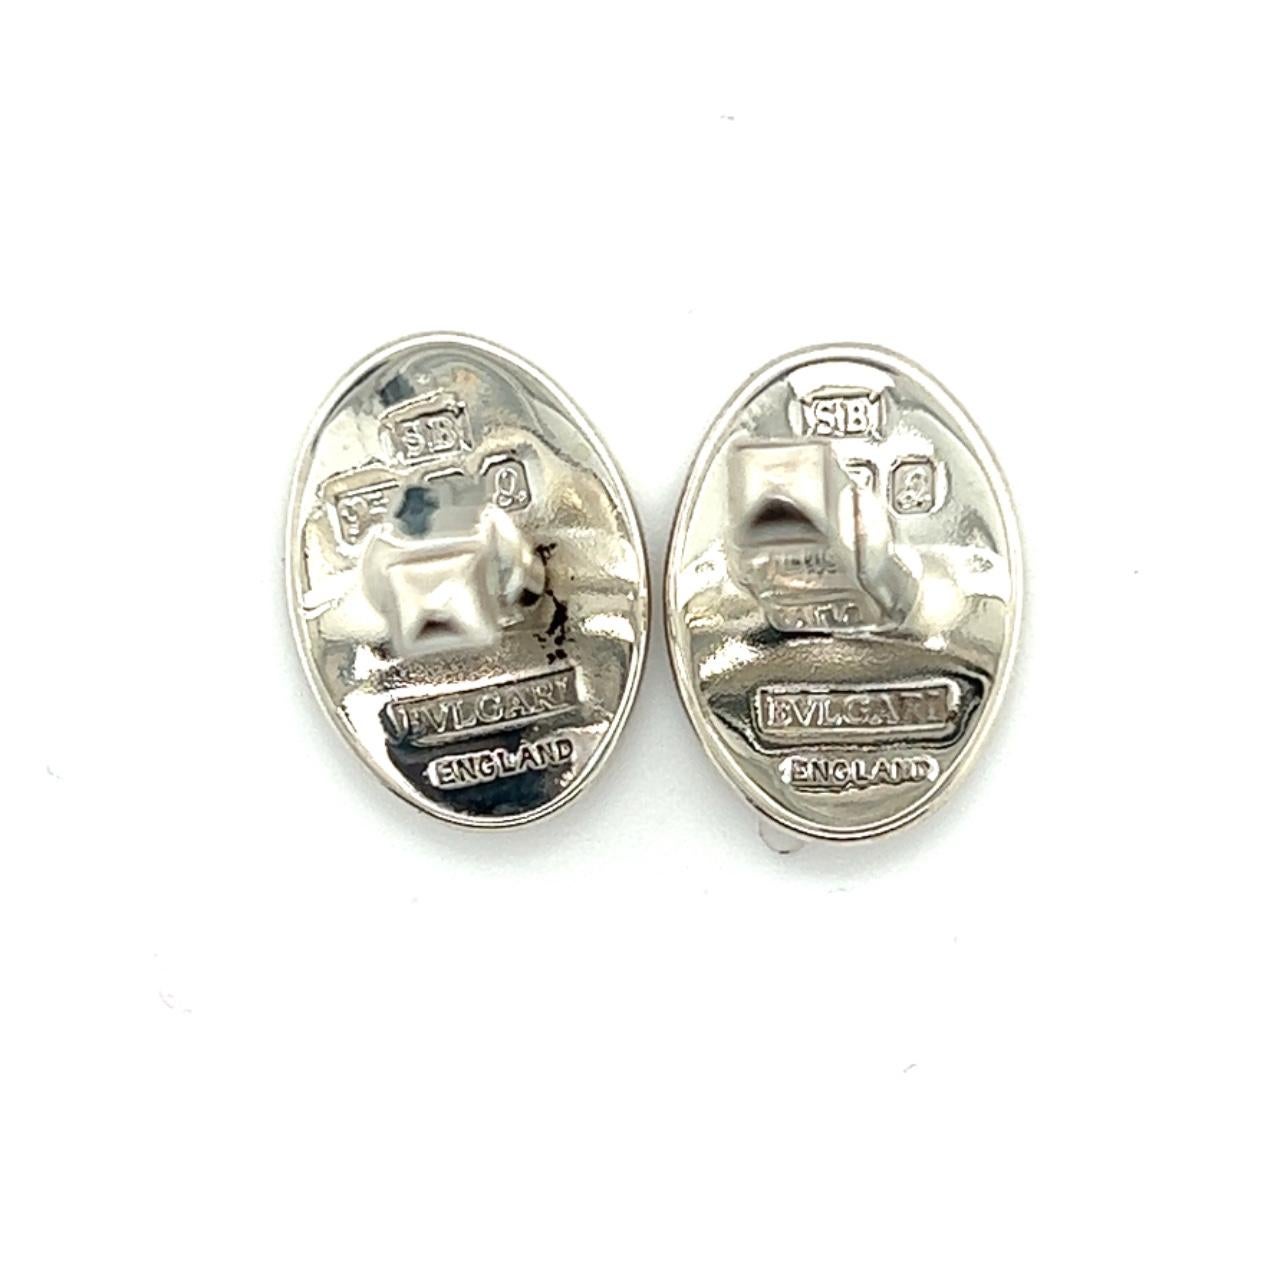 Bulgari Bvlgari Estate Engraveable Mens Cufflinks Sterling Silver In Good Condition For Sale In Brooklyn, NY